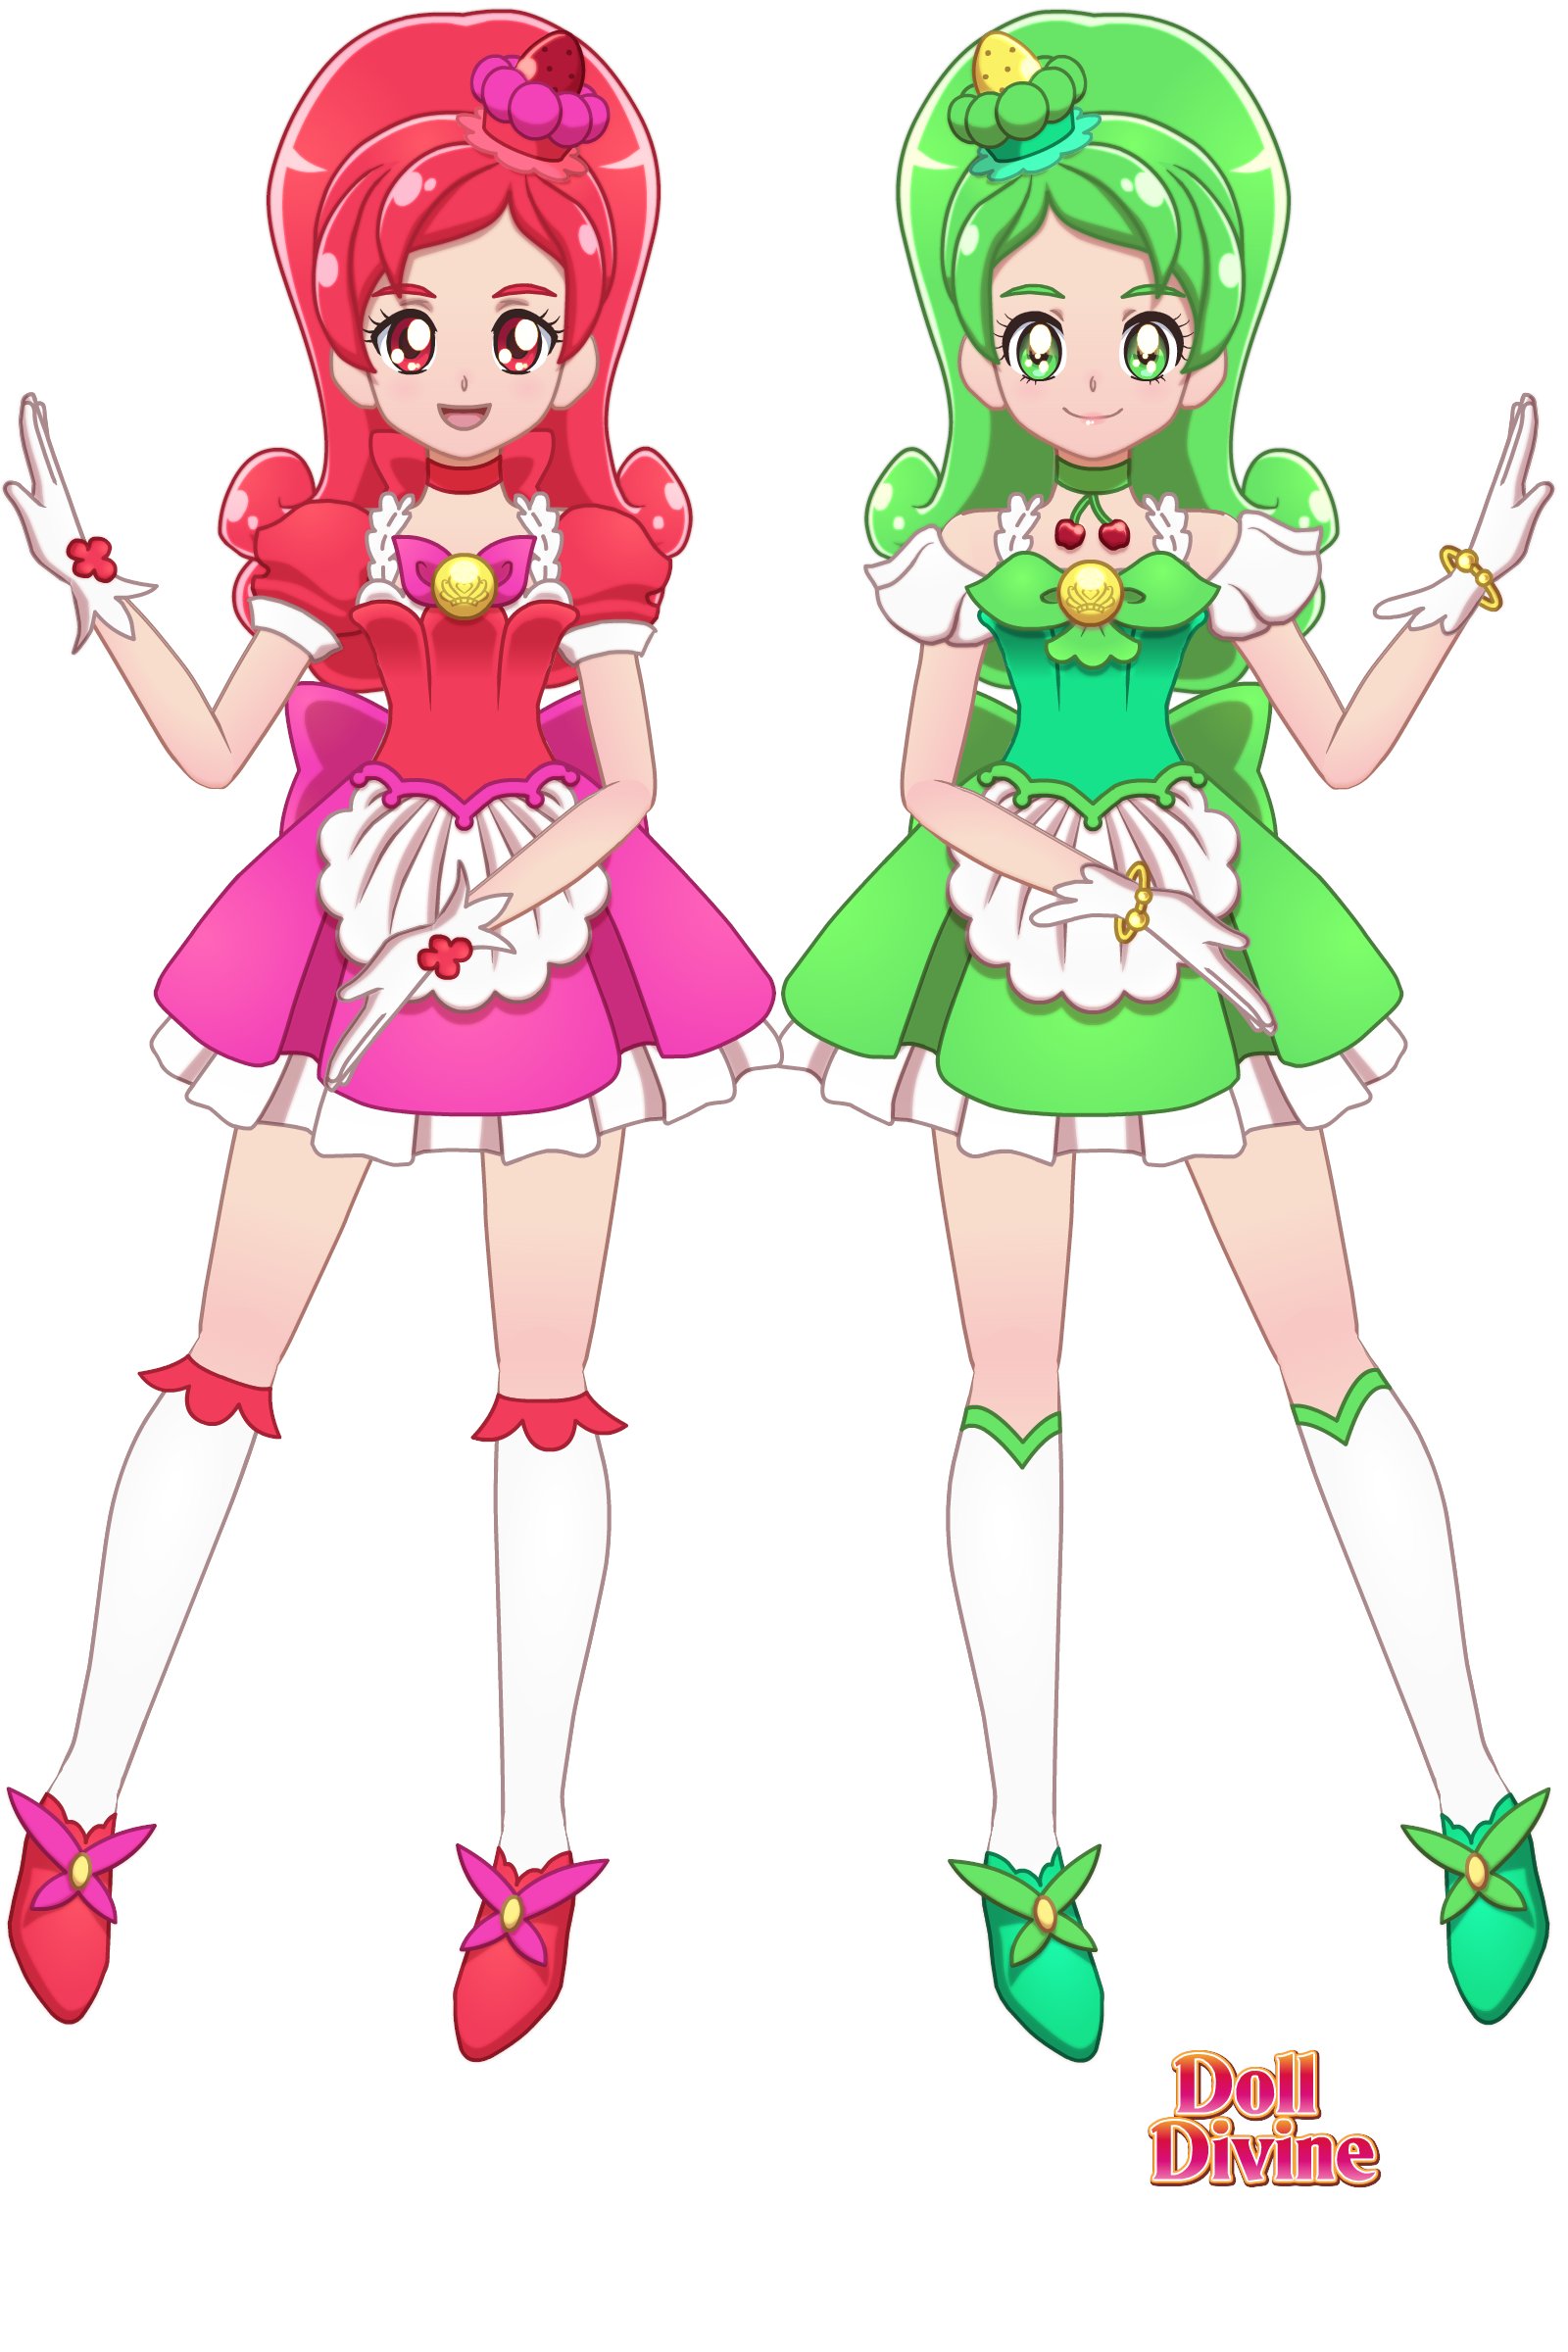 KuroYami on X: Precure 2023 fake leak: Another Story Precure with